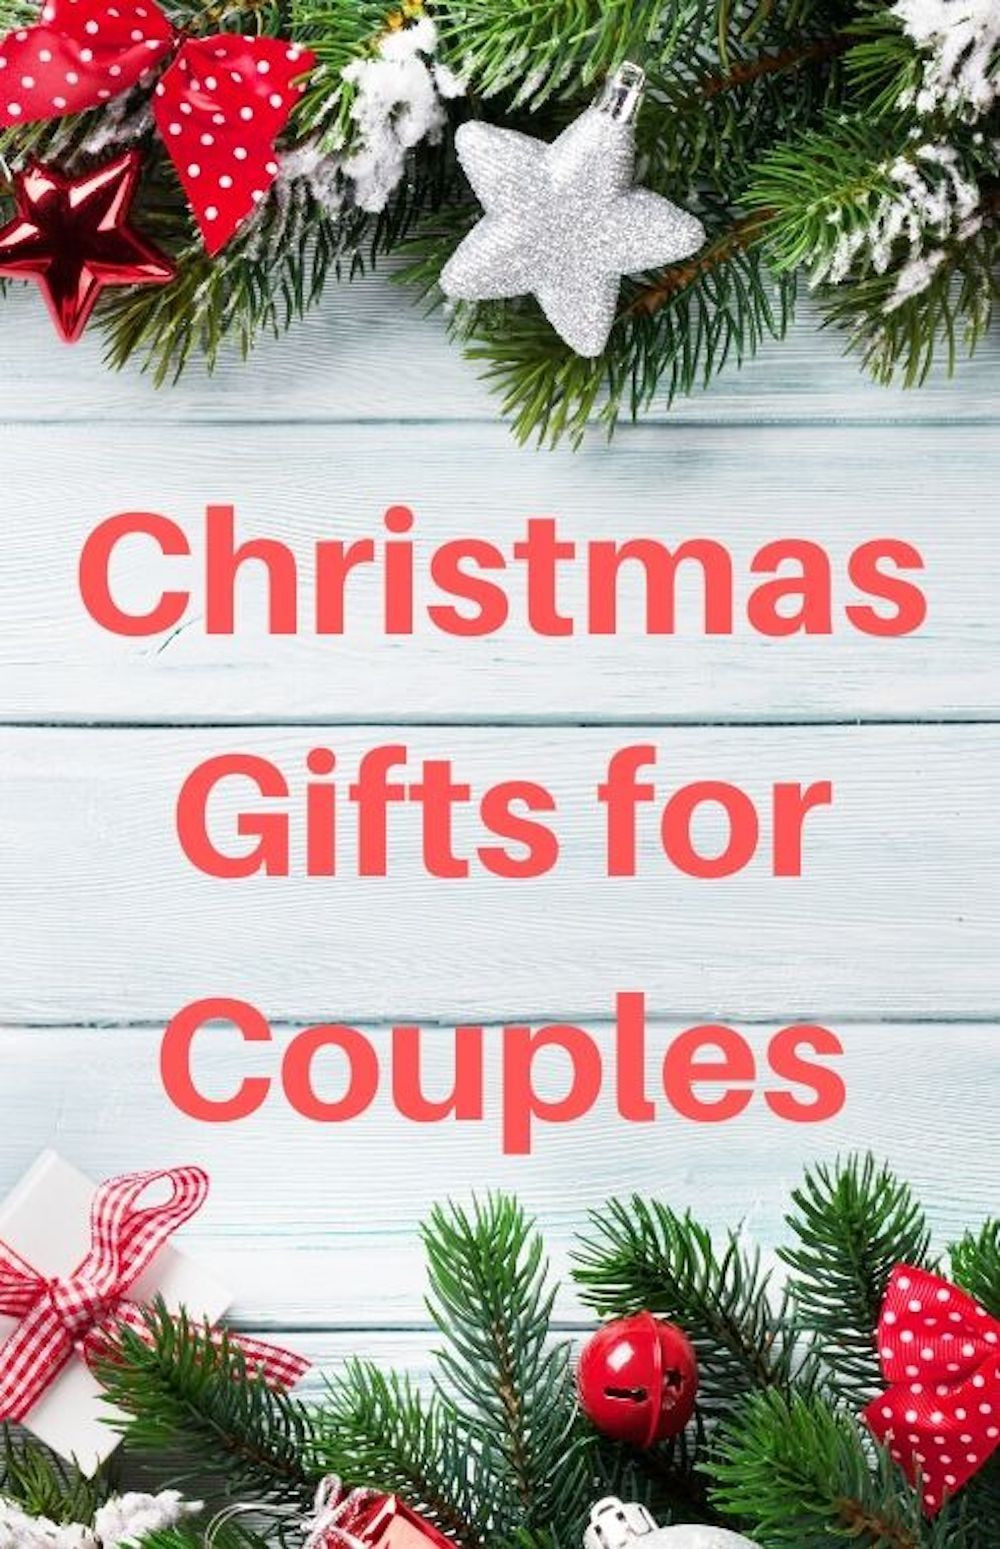 Christmas Gift Ideas For A Couple
 Christmas Gift Ideas for Couples